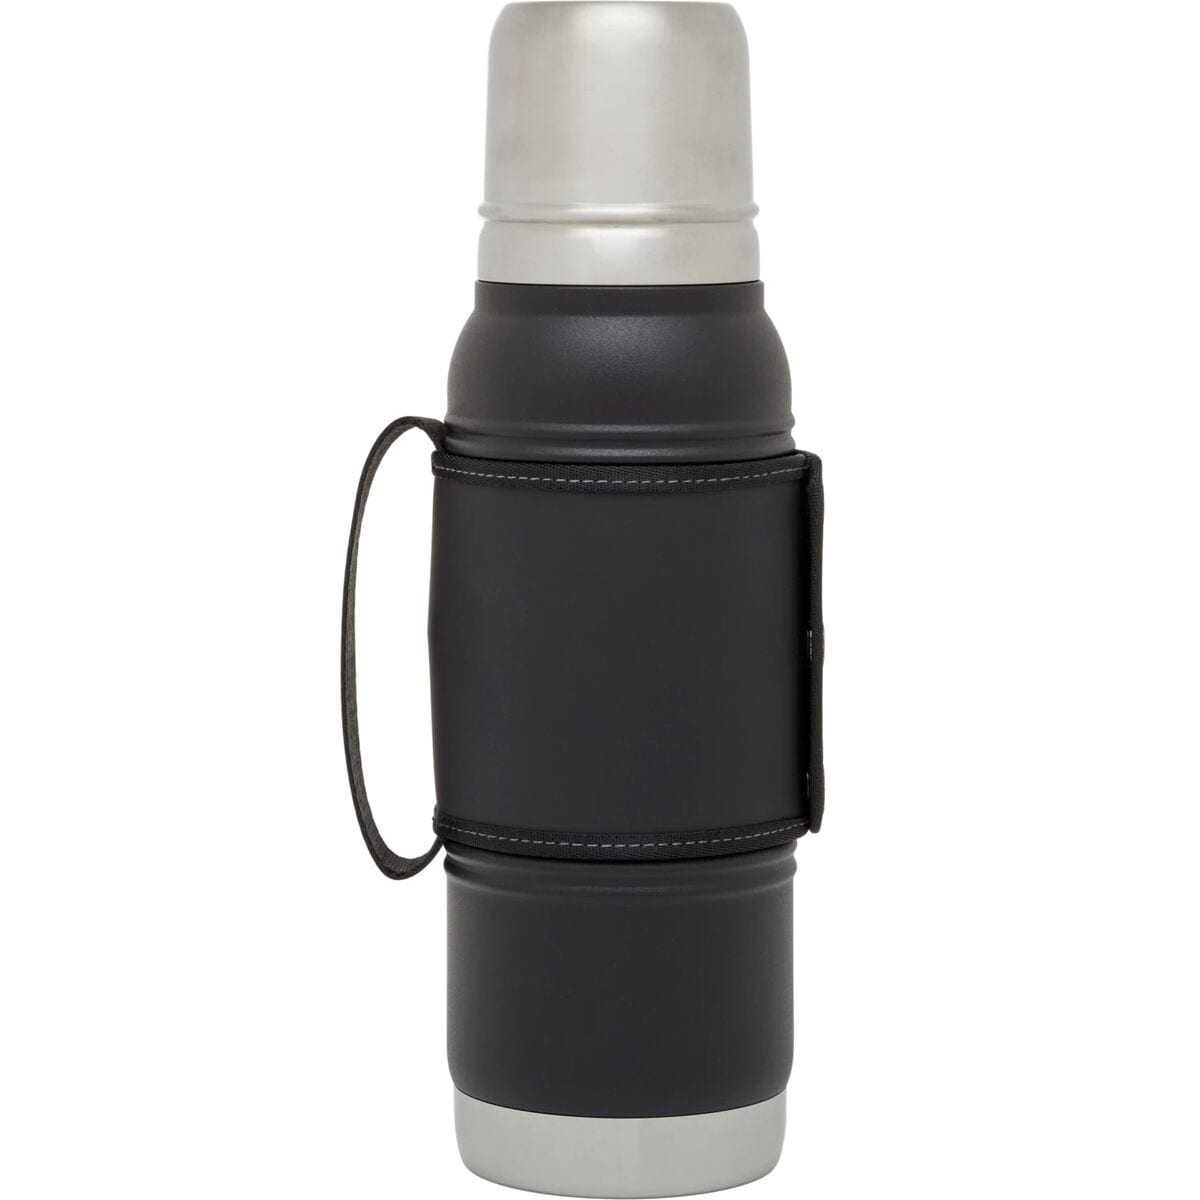 Stanley 17 Oz. 0.5 Liter Insulated Black Handle & Twist Top Mug Cup Thermos